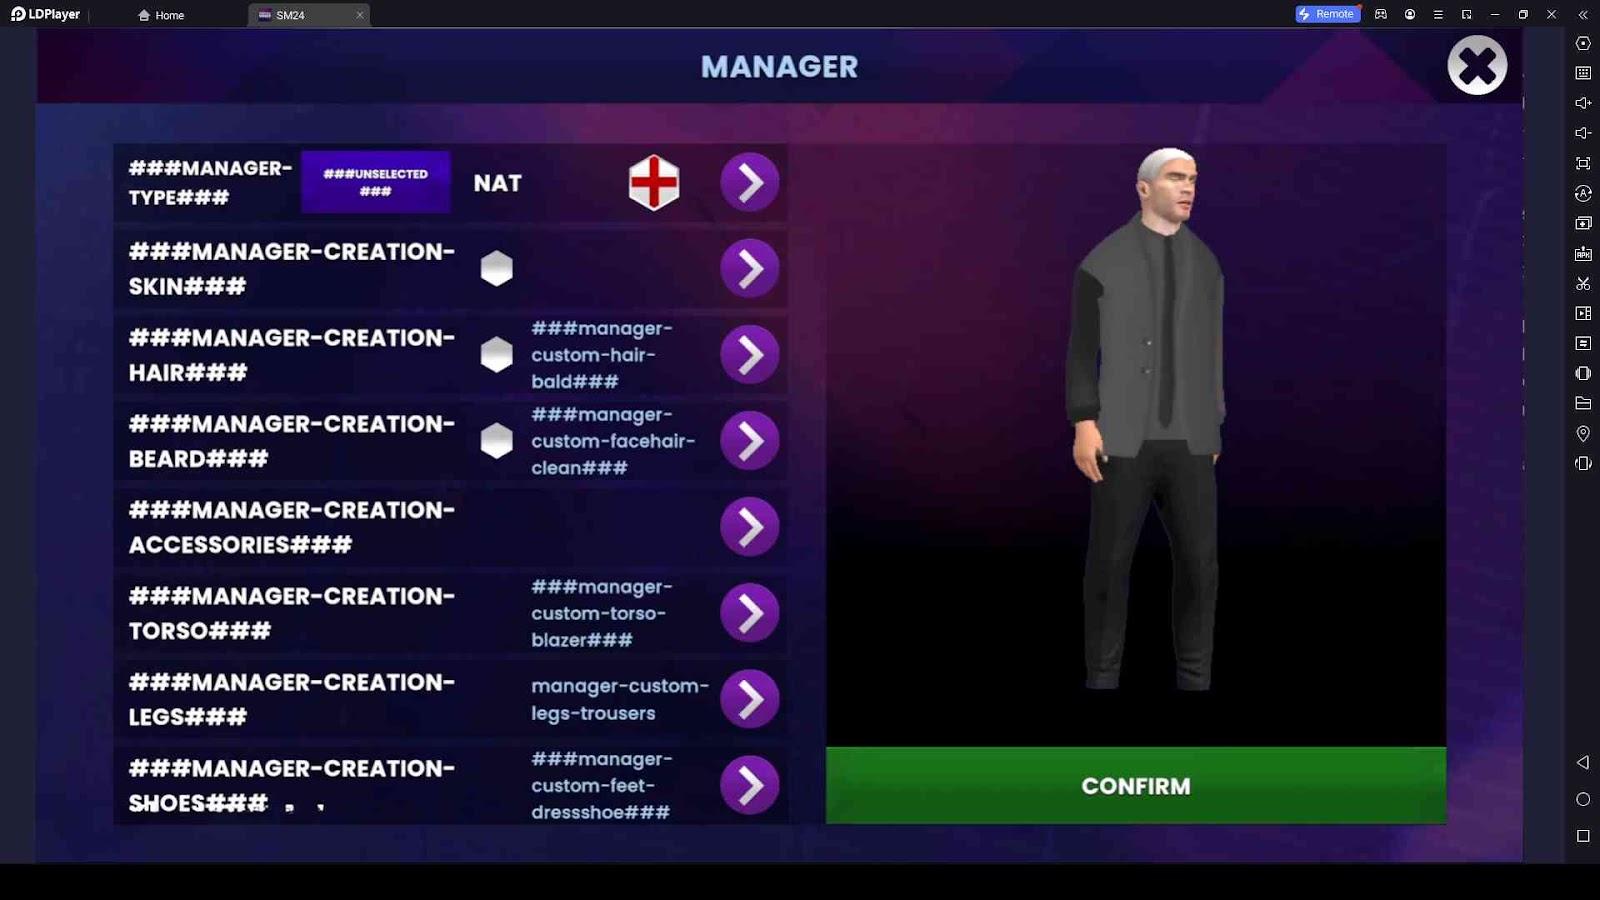 Choose a Manager